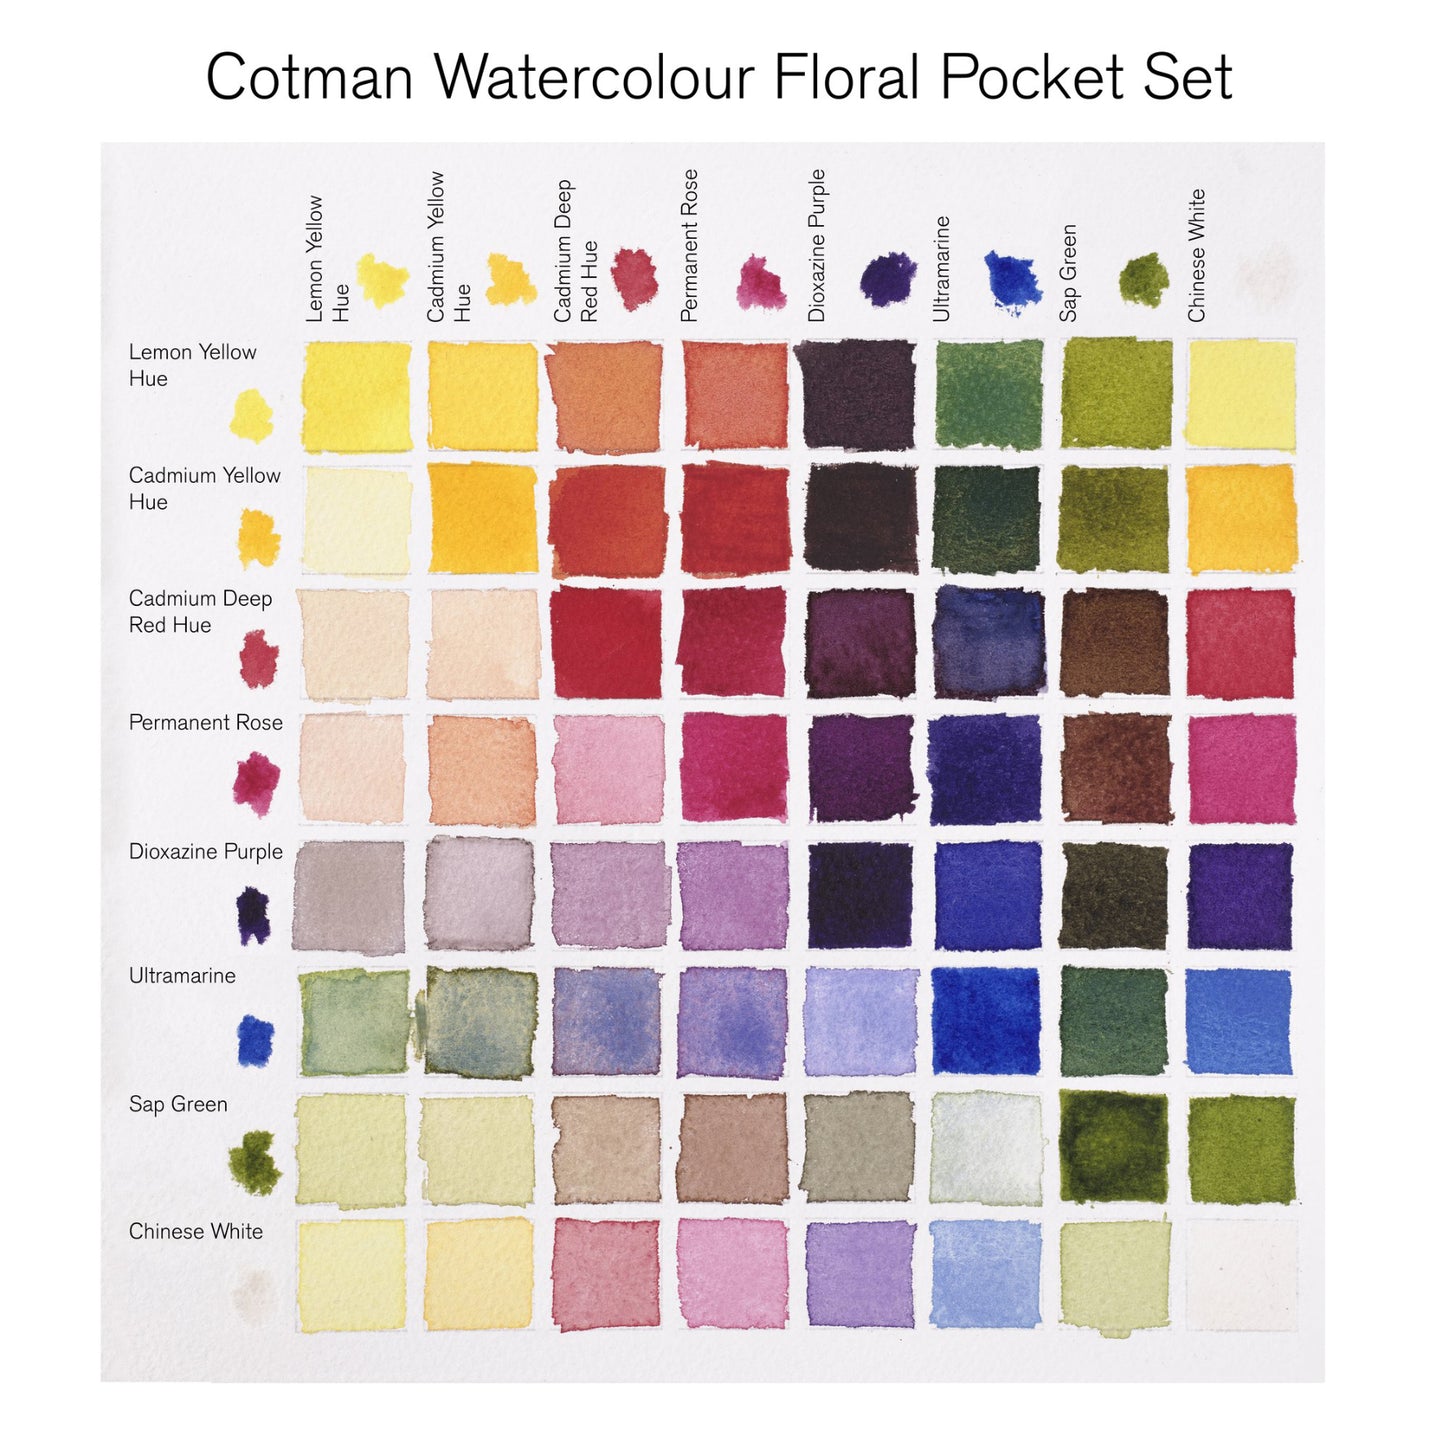 Cotman Watercolour Floral pocket set colour chart demonstrates the colour spectrum that can be mixed using the 8 available half pans in this set. This palette has been carefully curated for painting floral pieces. 